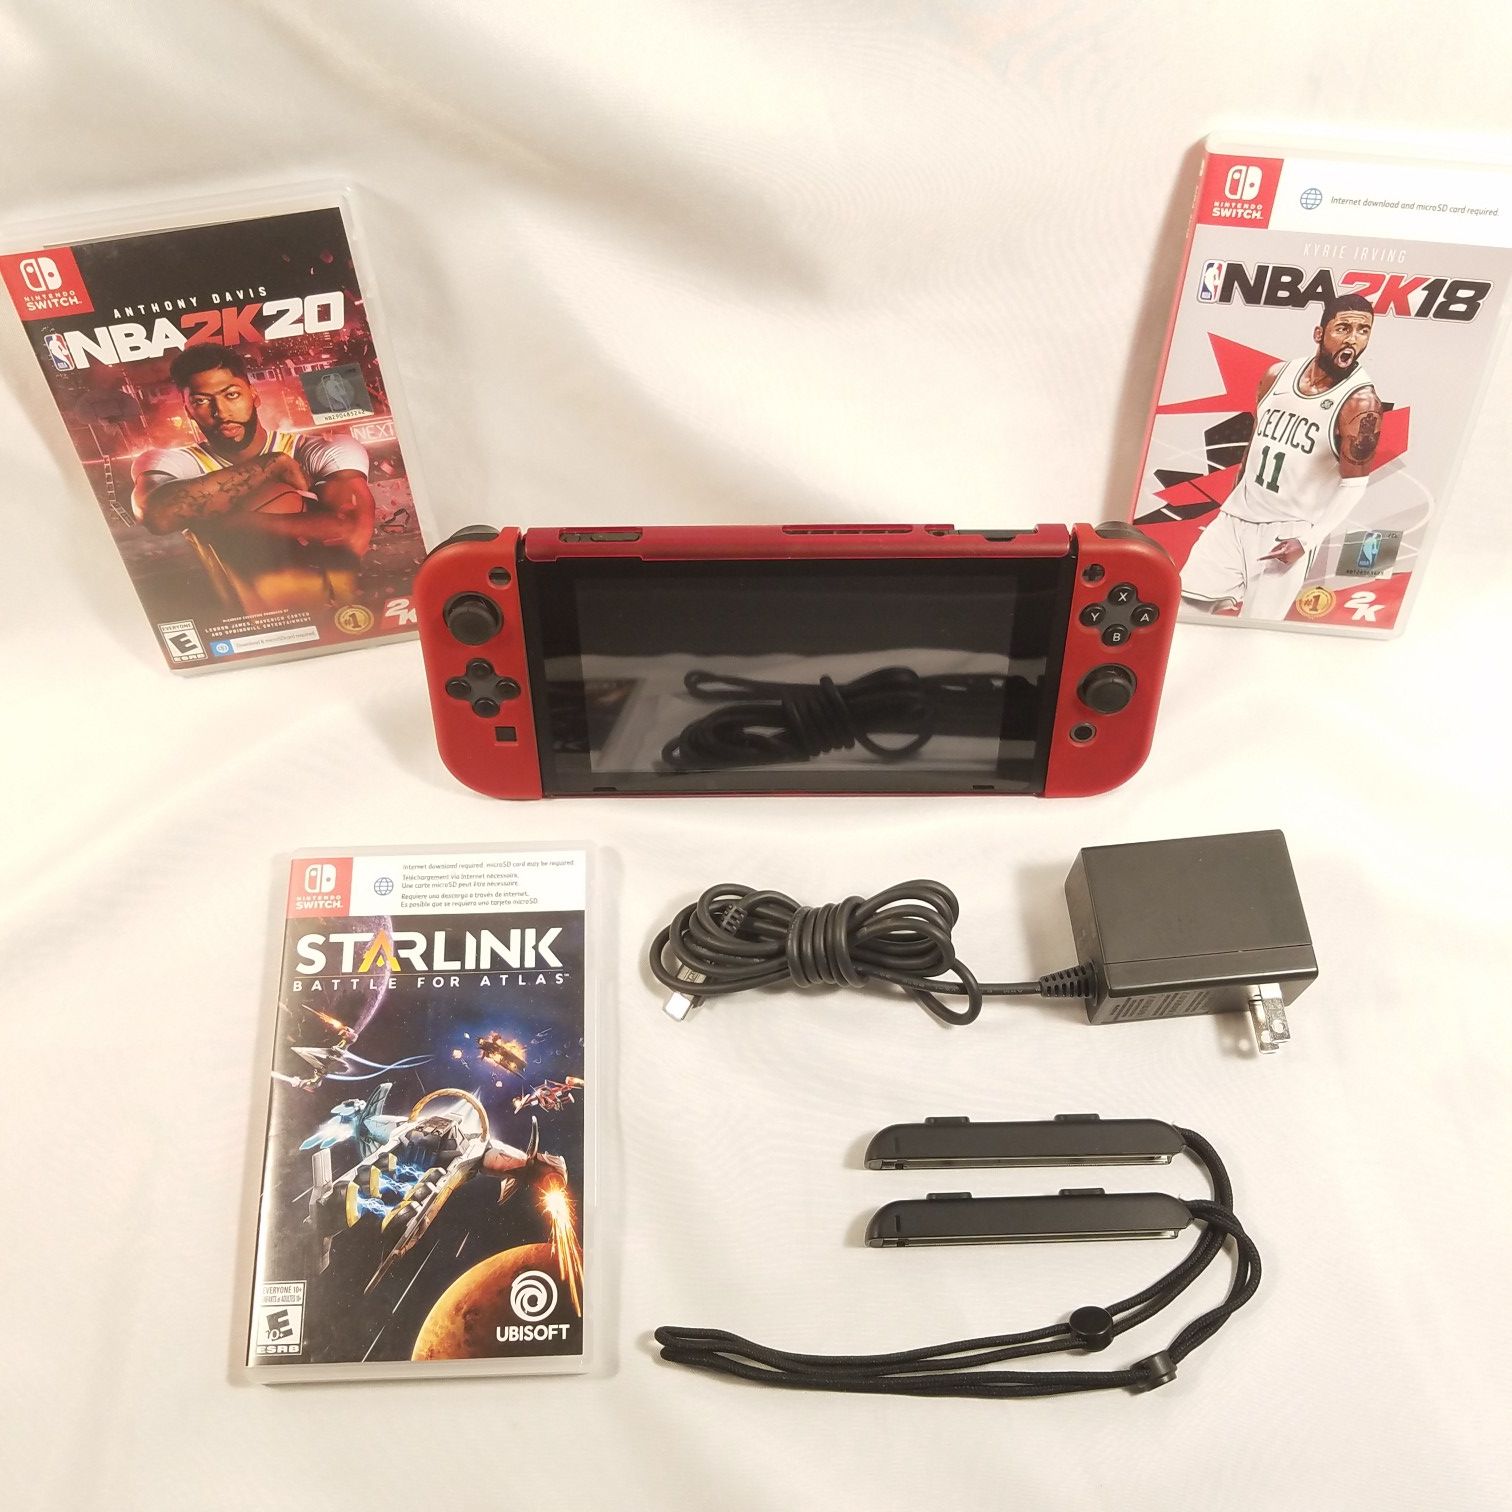 Nintendo Switch V2 + 3 games Charger + Joy Con Straps - Everything in pictures $265